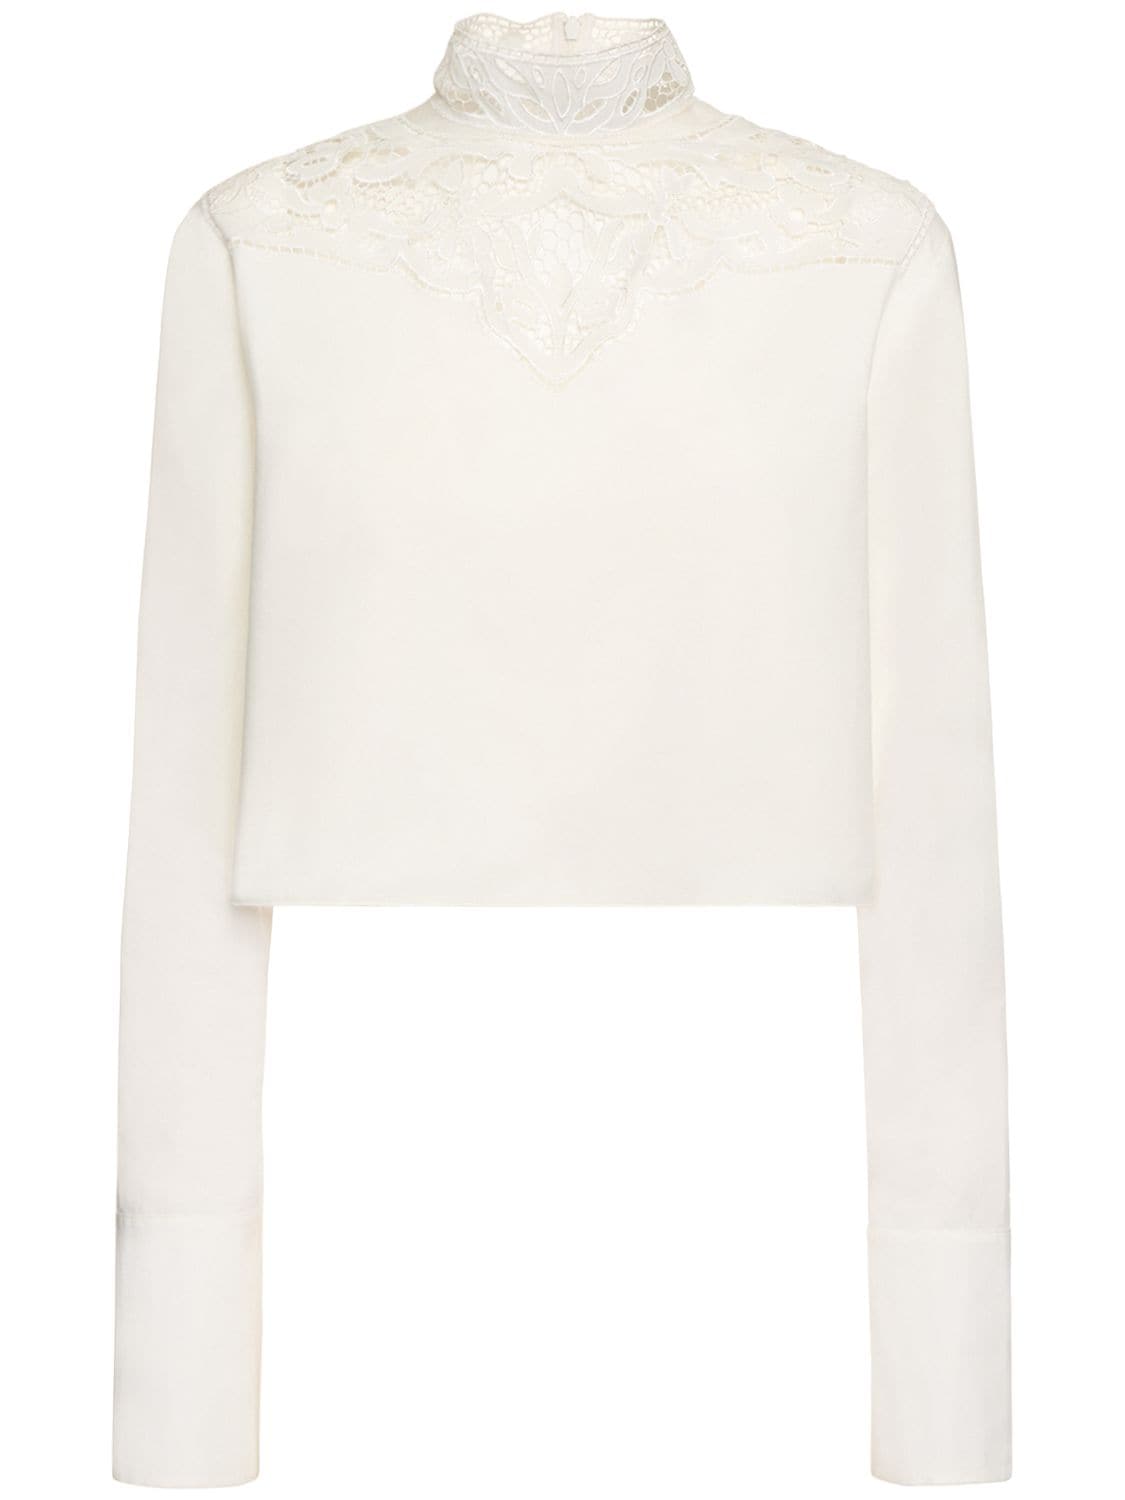 Image of Cotton Poplin Blouse W/ Lace Inserts